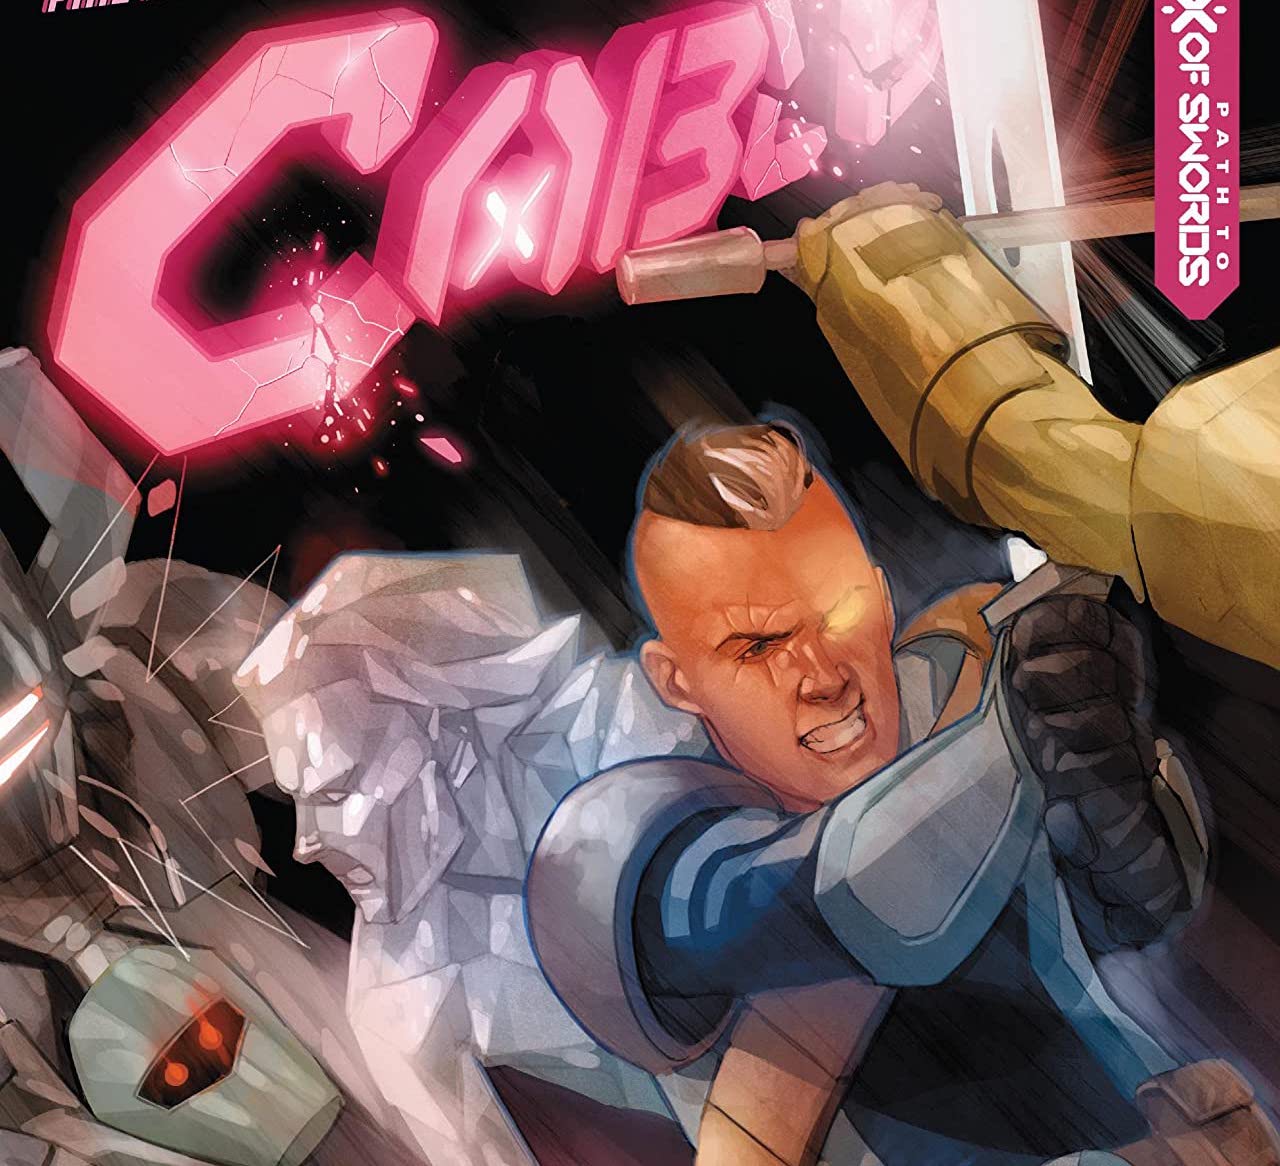 'Cable' #4 review: A lot here to enjoy